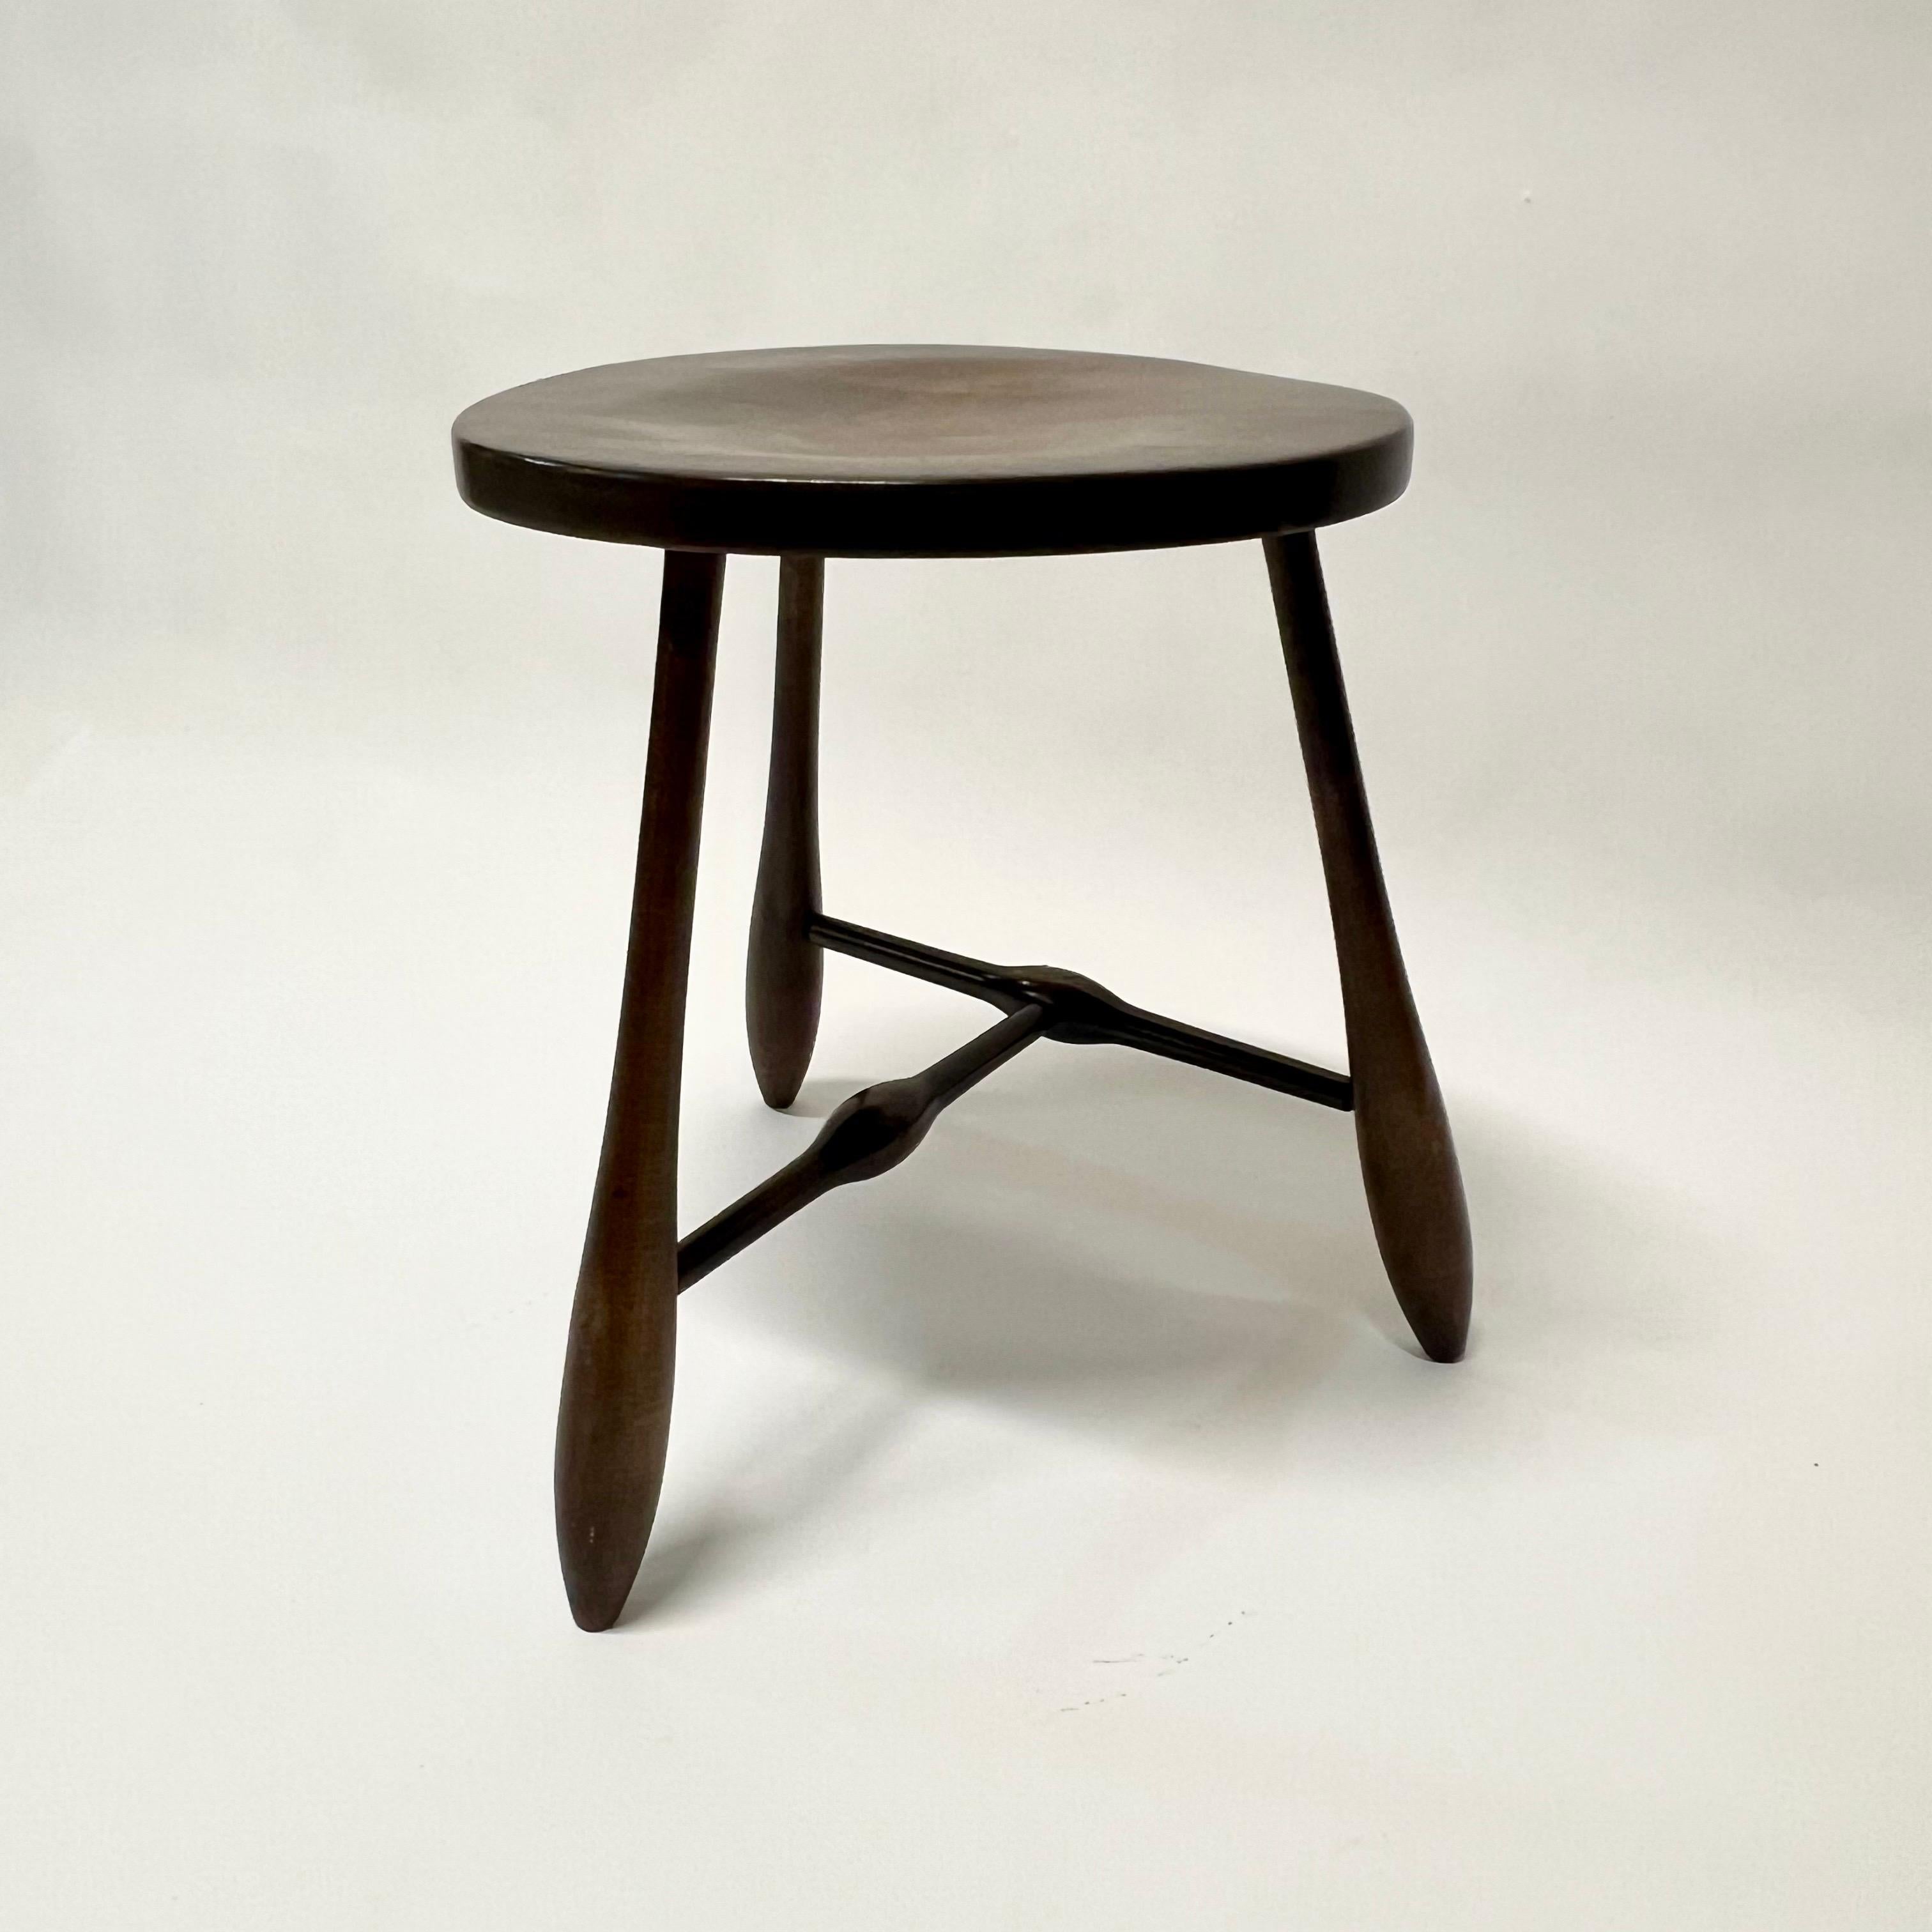 Vintage Tripod Stool by Hale of Vermont c1960s For Sale 1